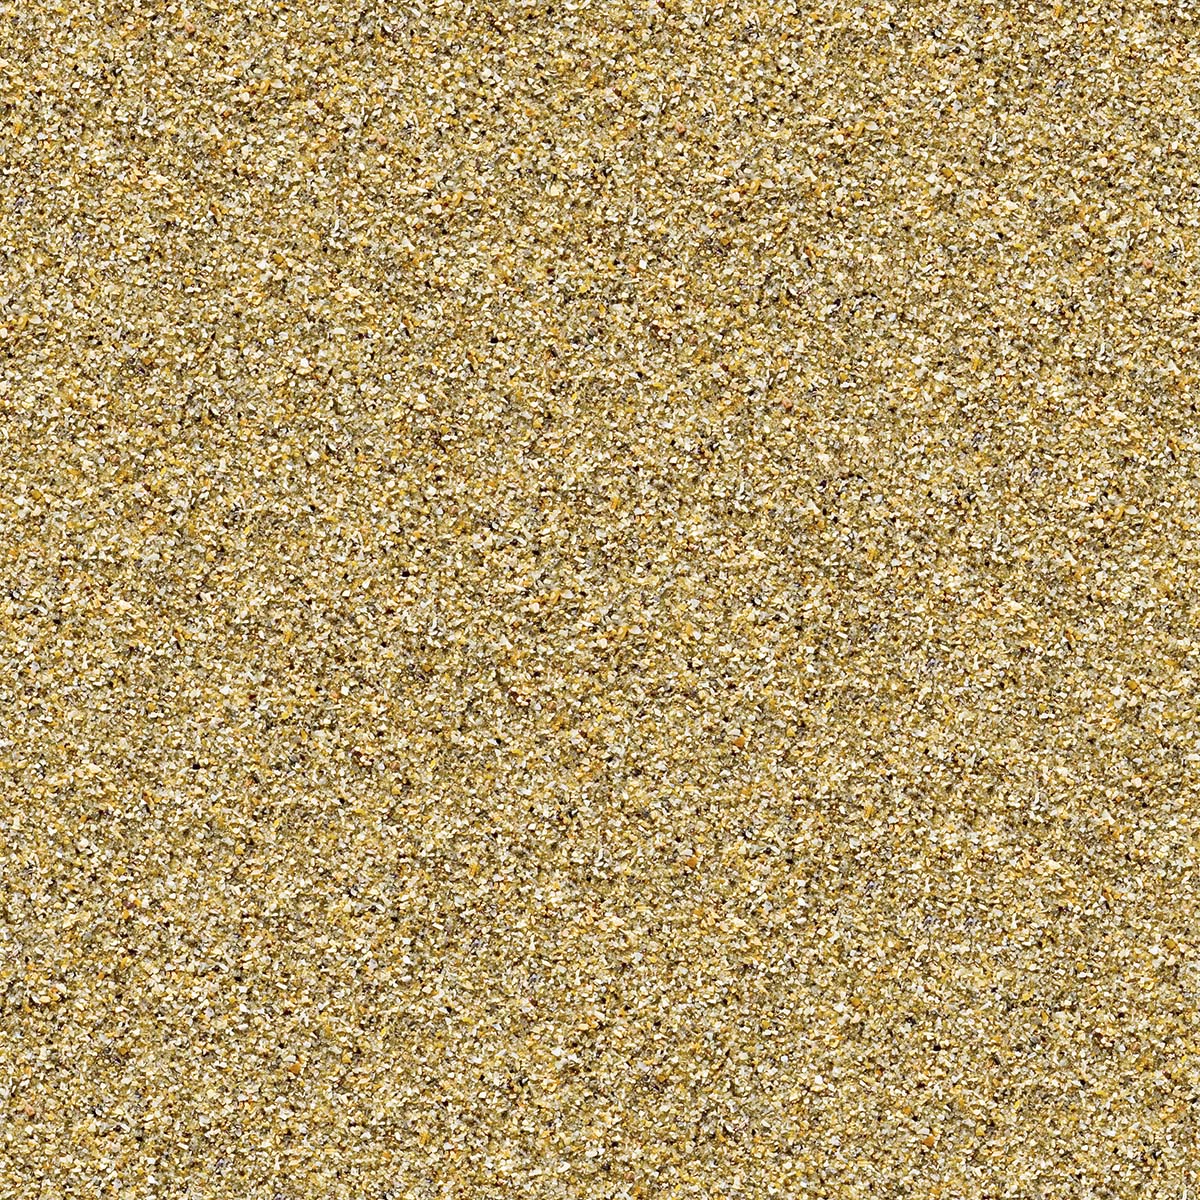 A close up of a yellow speckled surface